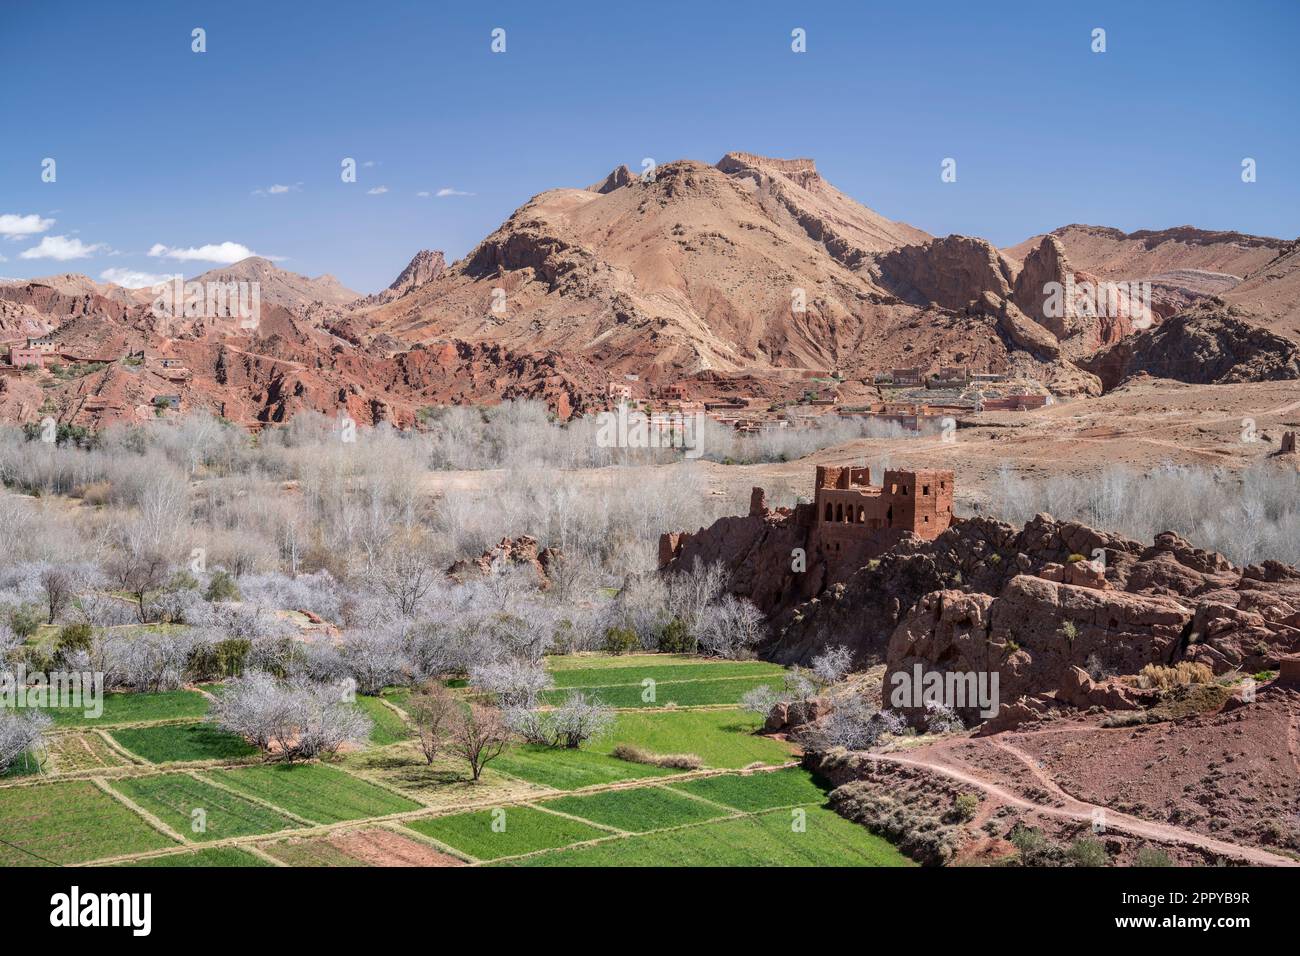 Landscape in the Dades valley with the ruins of an old adobe fortress. Stock Photo